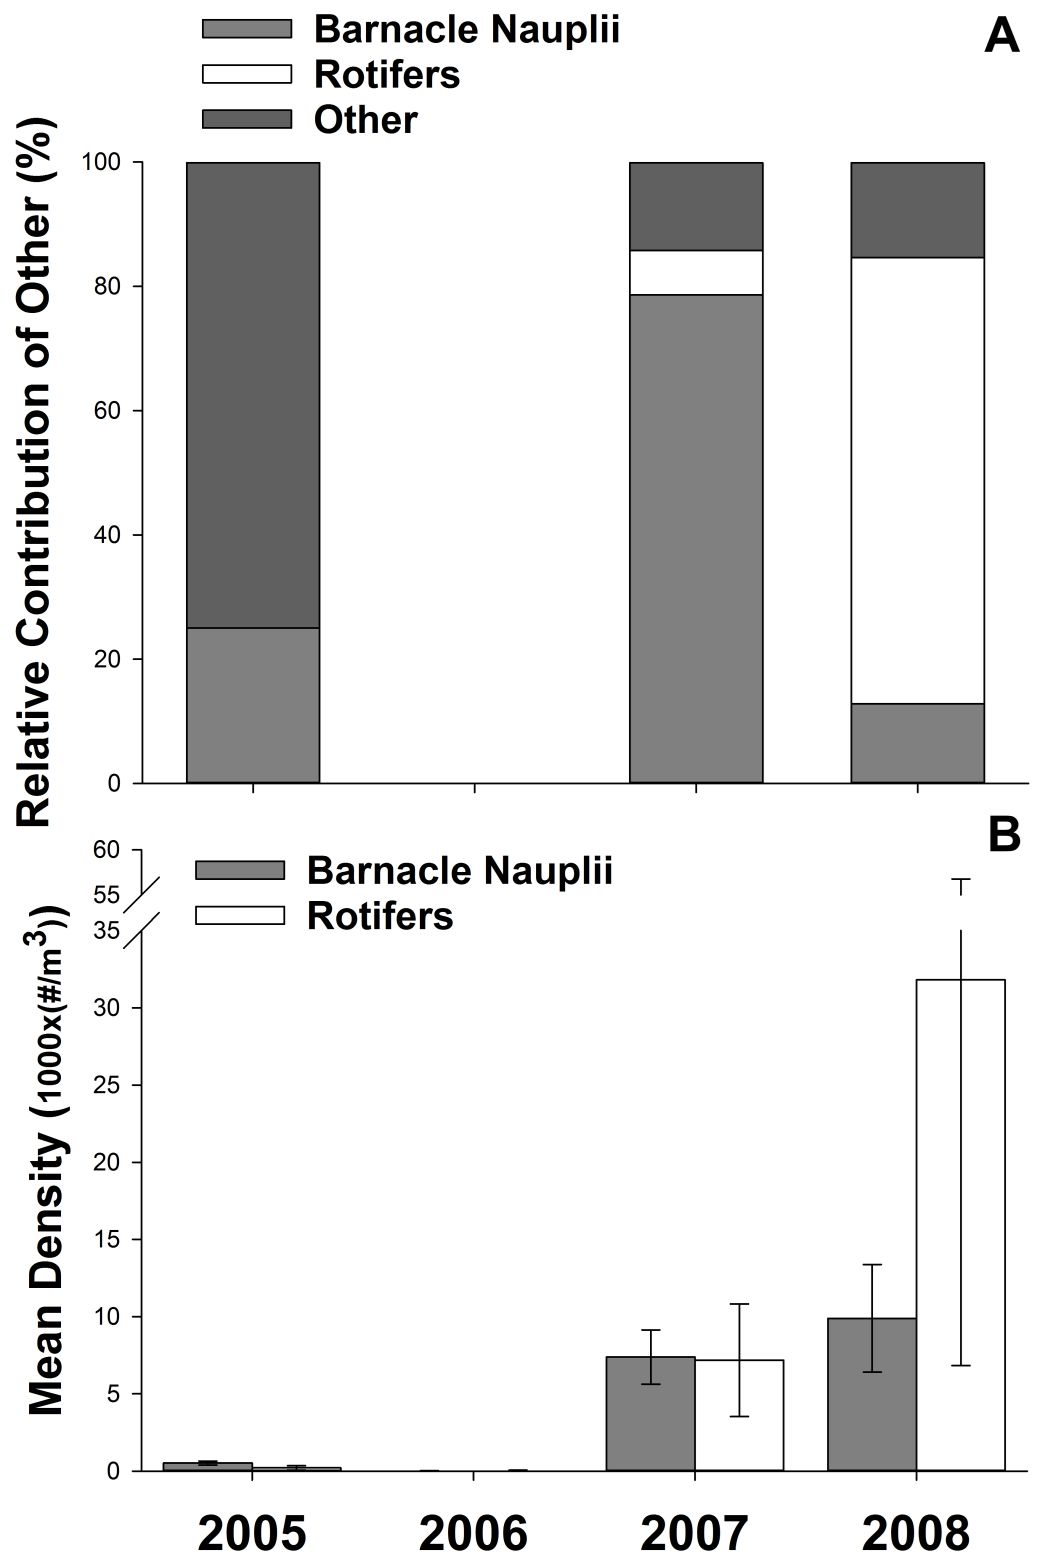 Relative contribution (%) to the “other” category of larval Longfin Smelt diet items (A) and mean density (1000x (#/m3)) (B) of barnacle nauplii (grey bars) and rotifers (white bars) during March through May in Napa River by year. 